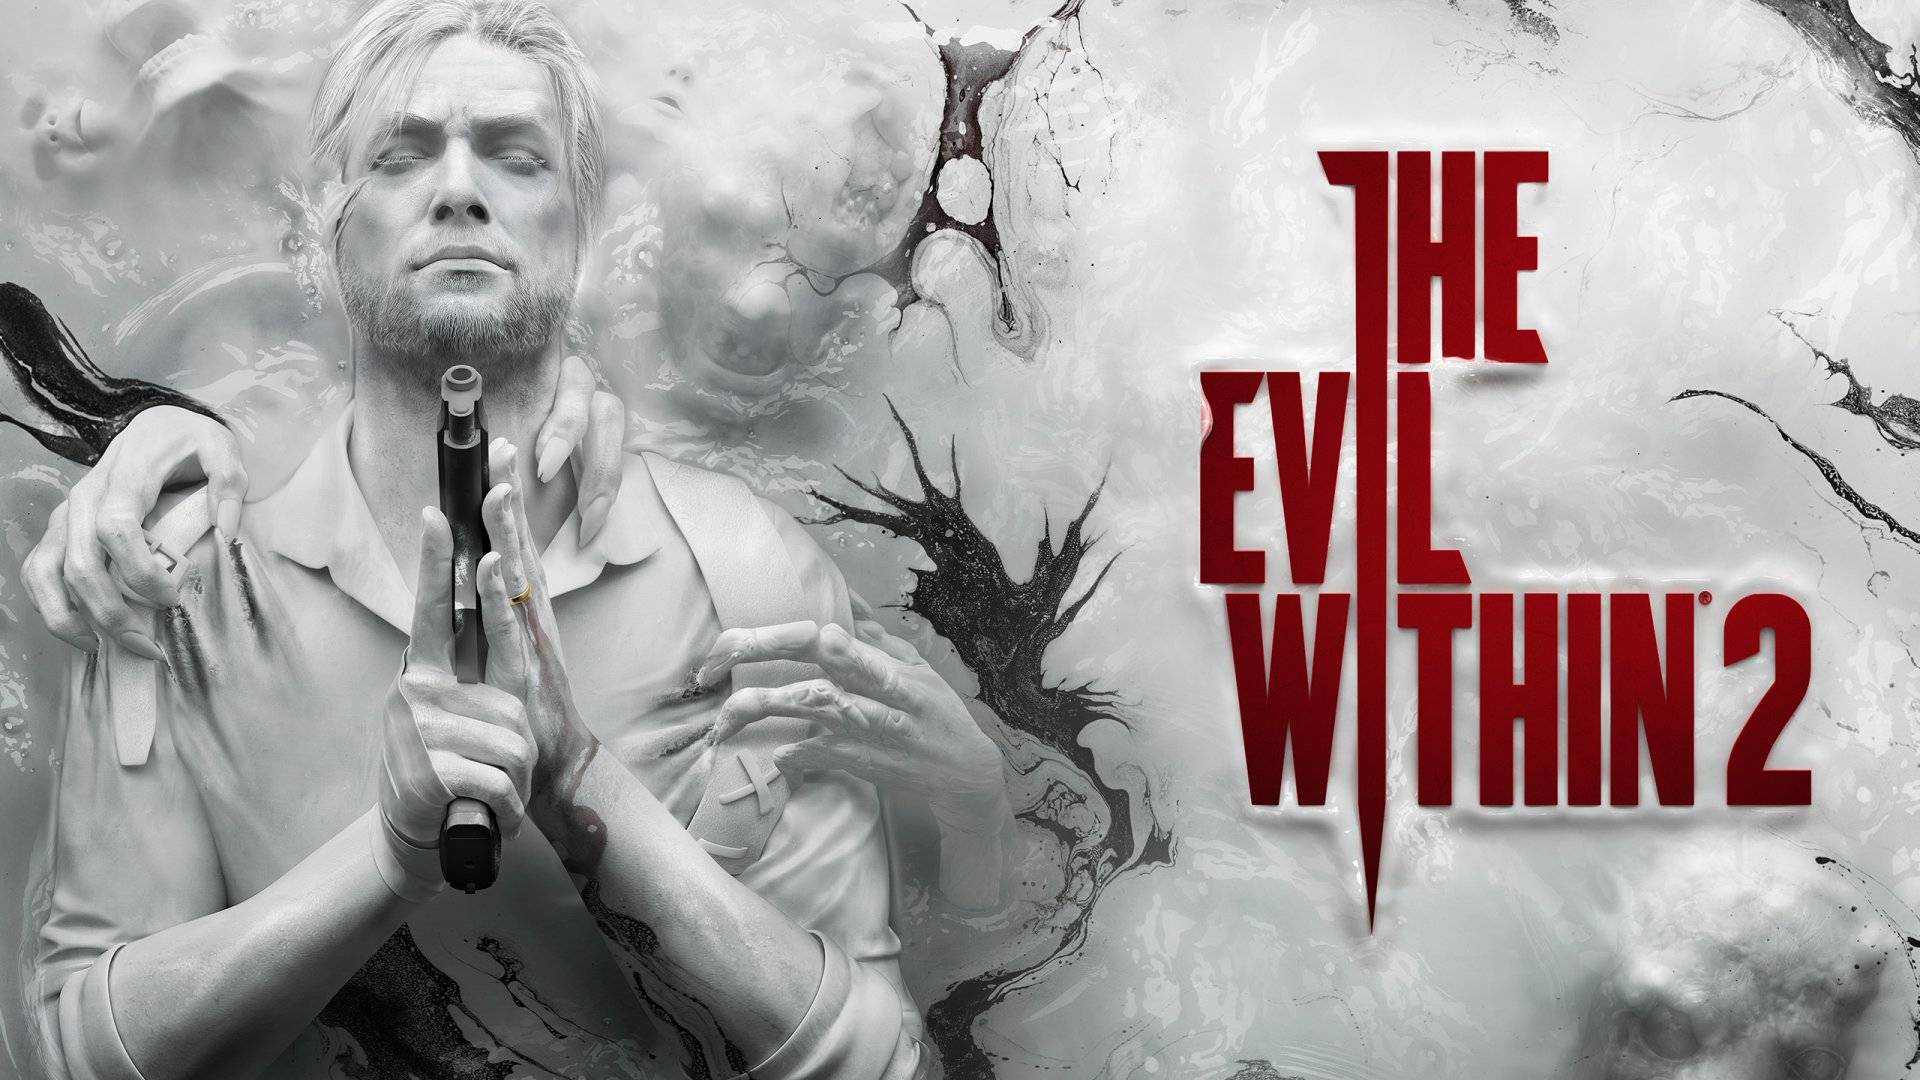 EGS_TheEvilWithin2_TangoGameworks_S1_2560x1440-c87f377e1990d84a98db5fb4836af9a9.jpg